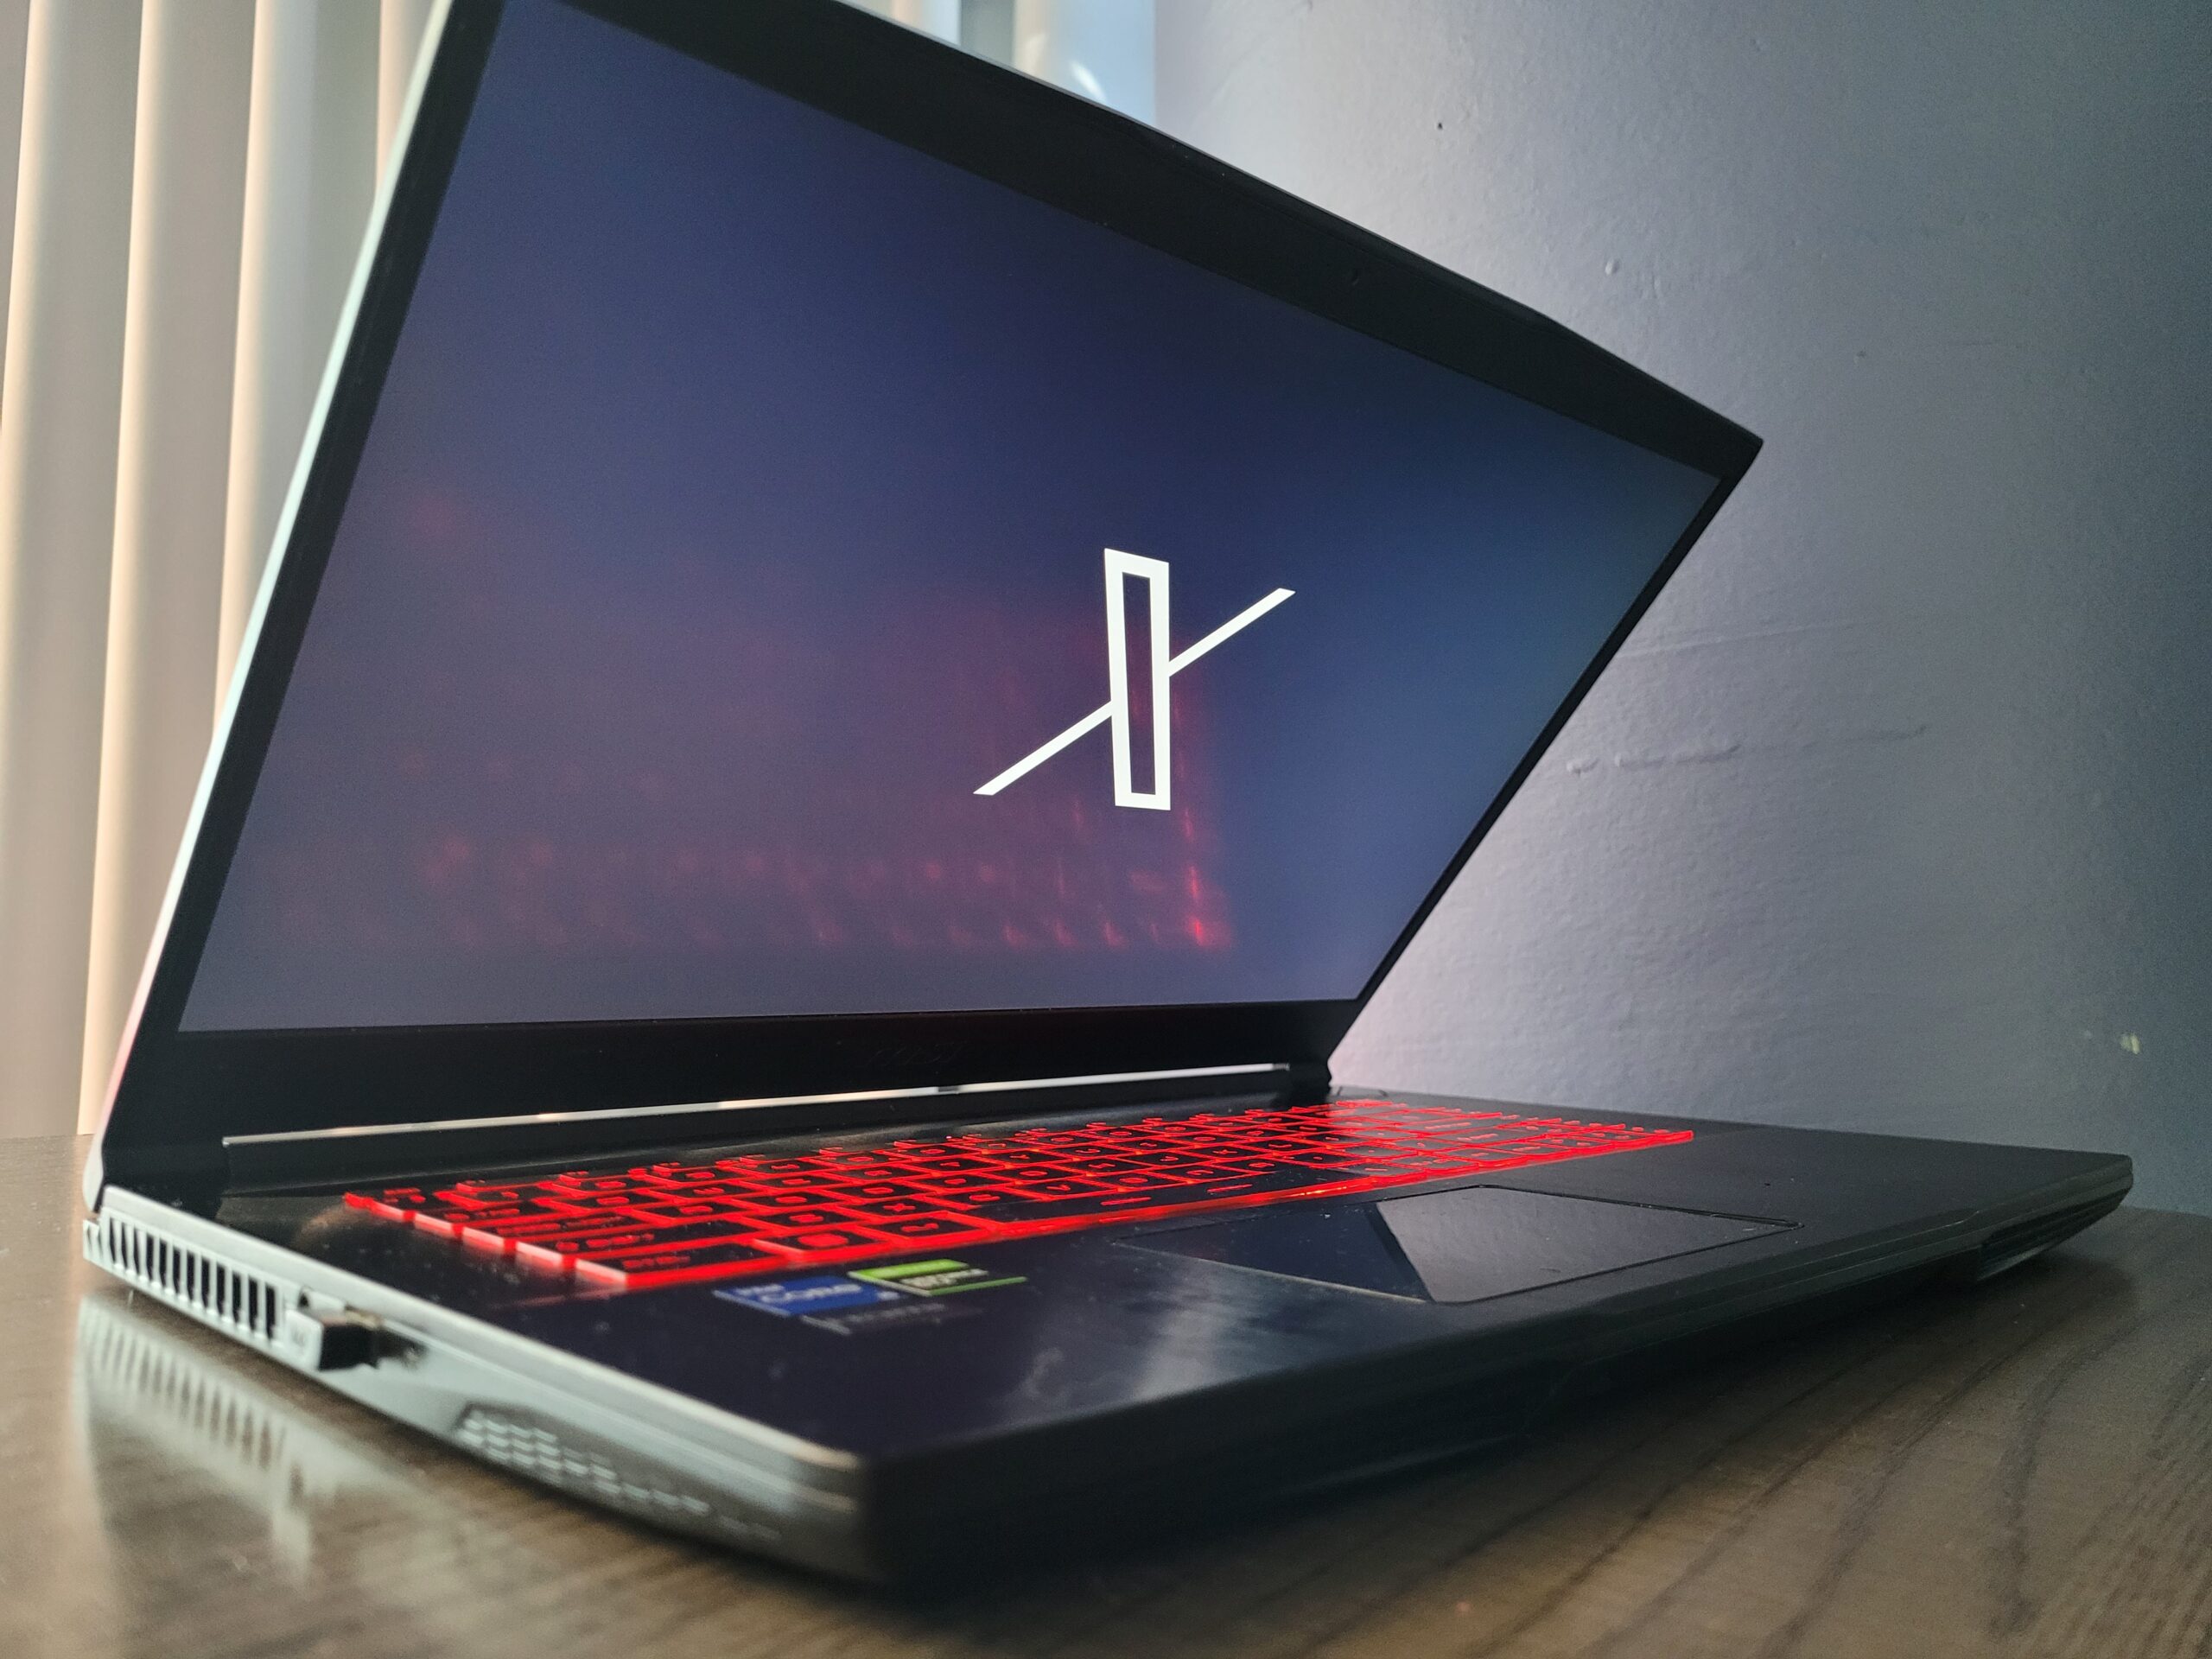 A half closed laptop with red keyboard lights in a dark room displays the X logo